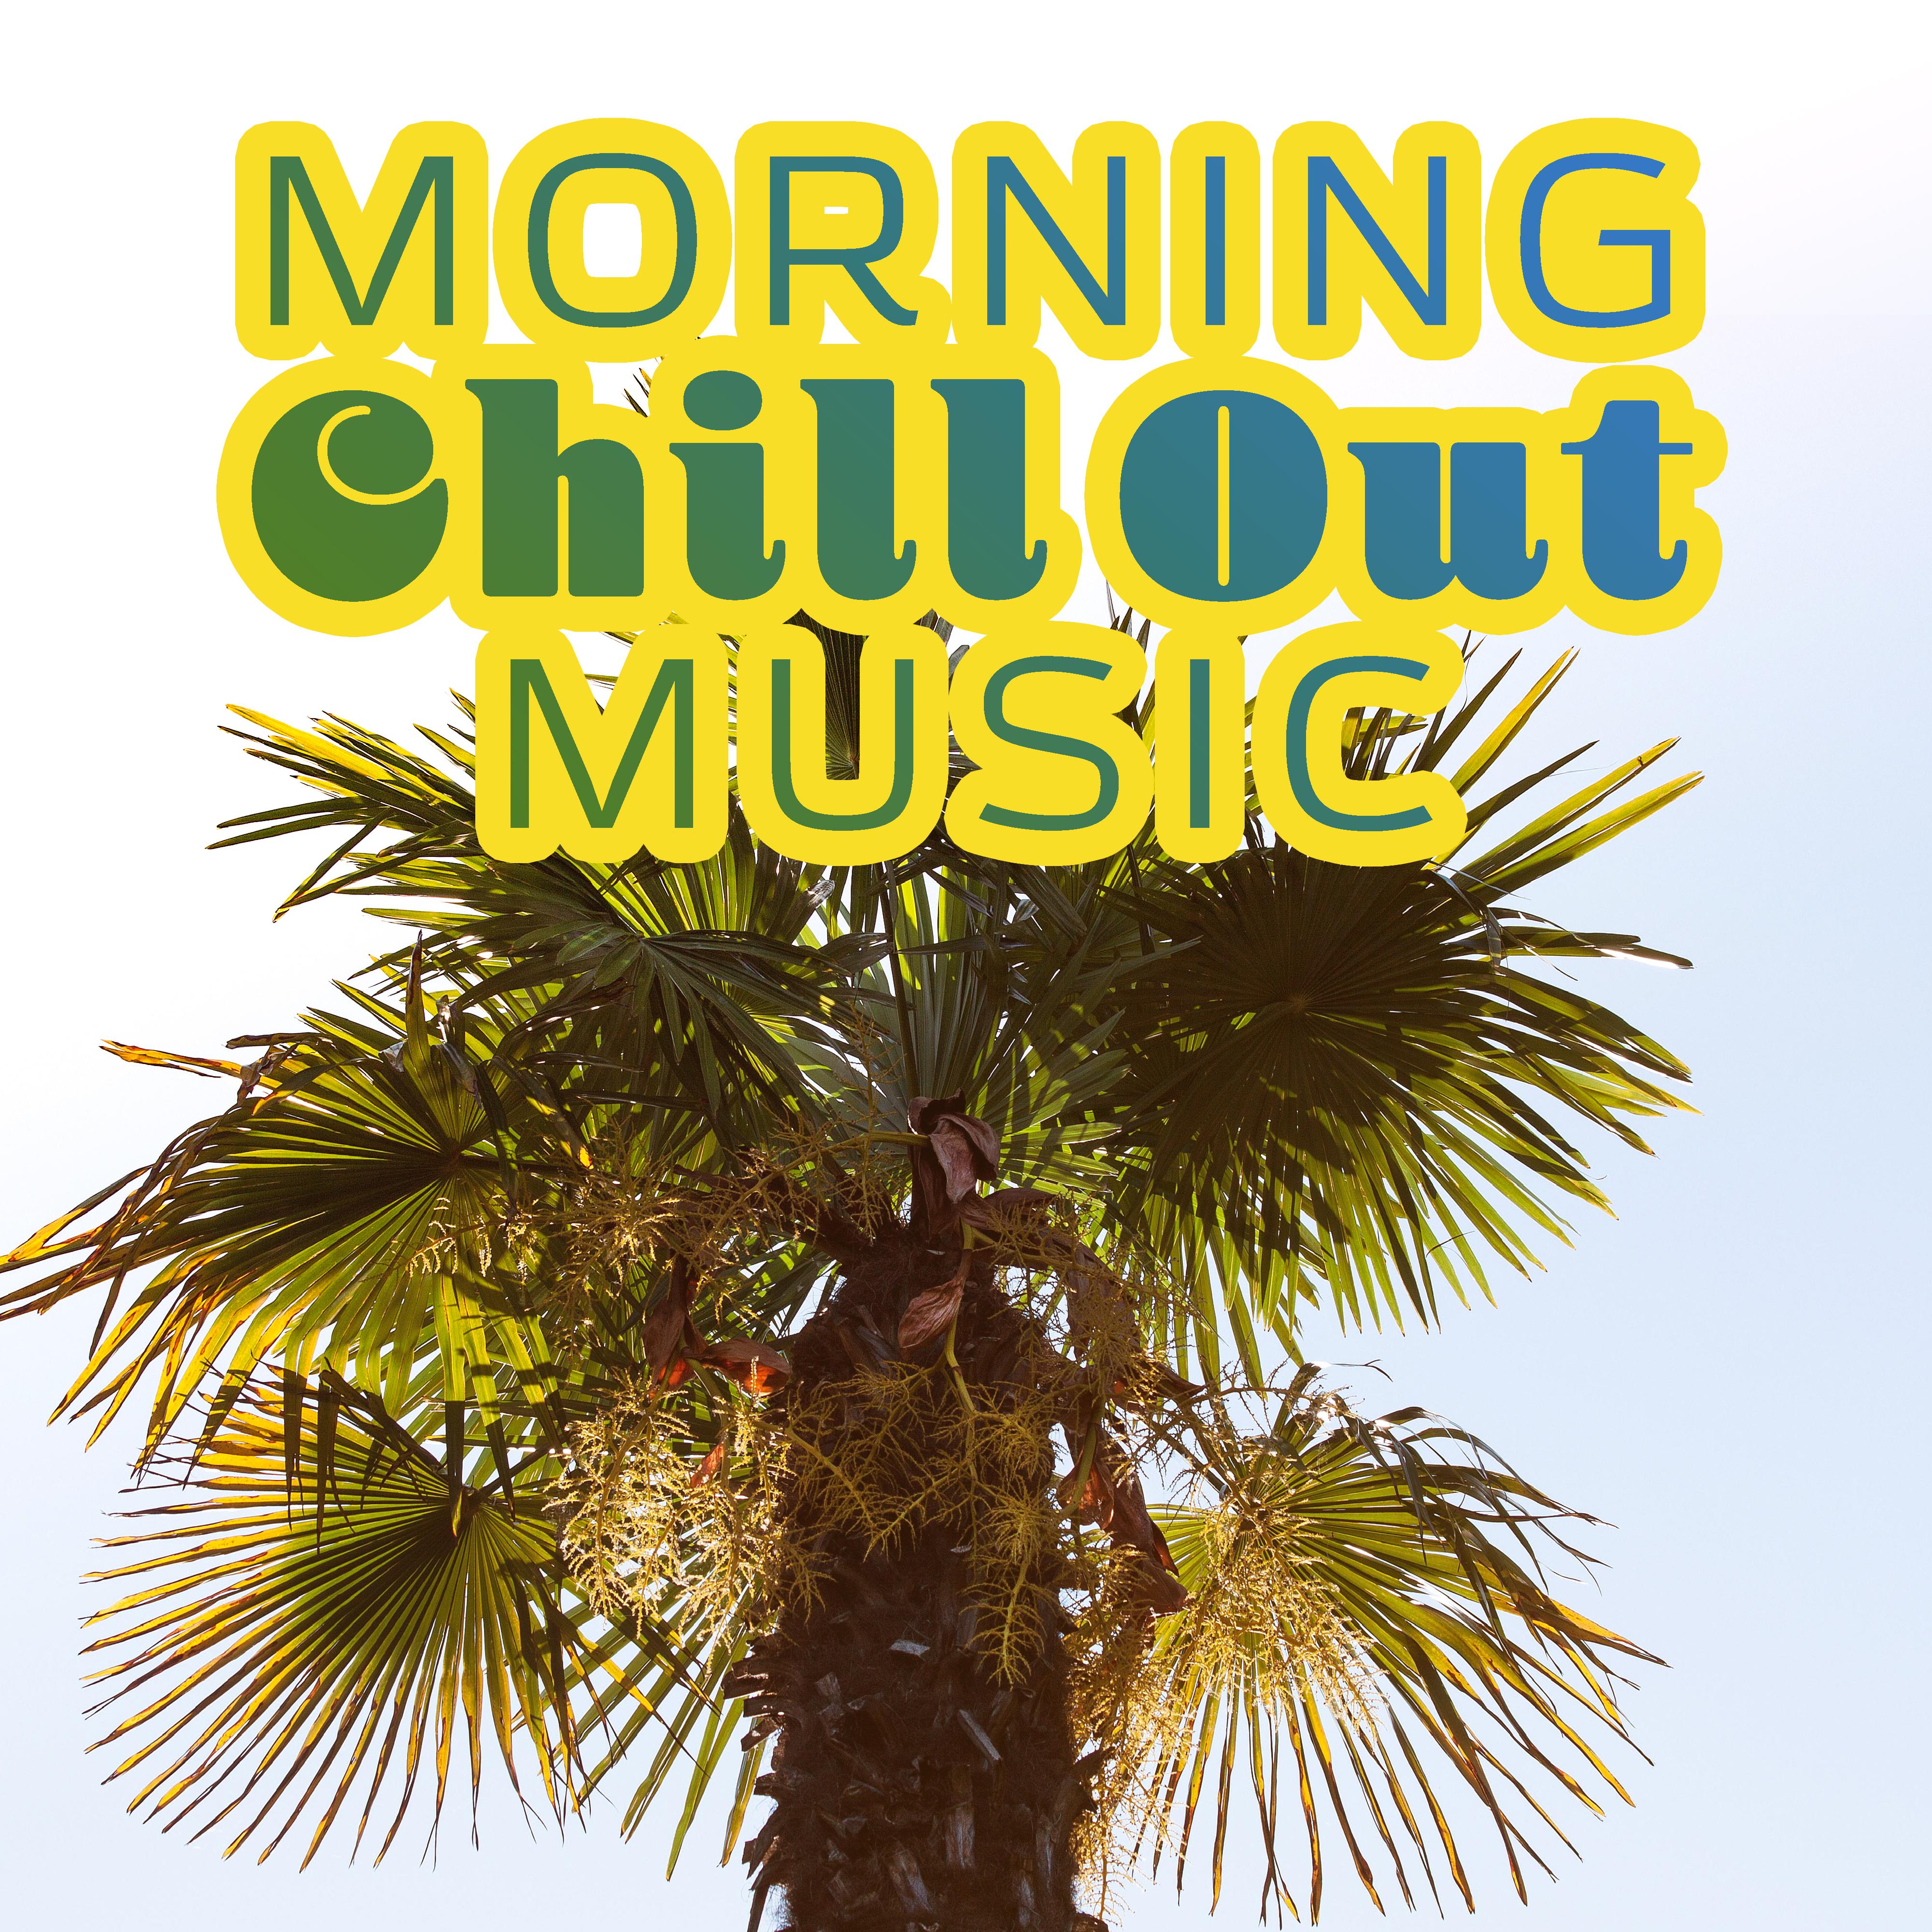 Morning Chill Out Music – Summer Calm Sounds, Holiday Relaxation, Sunrise Chill Out, Soothing Vibes